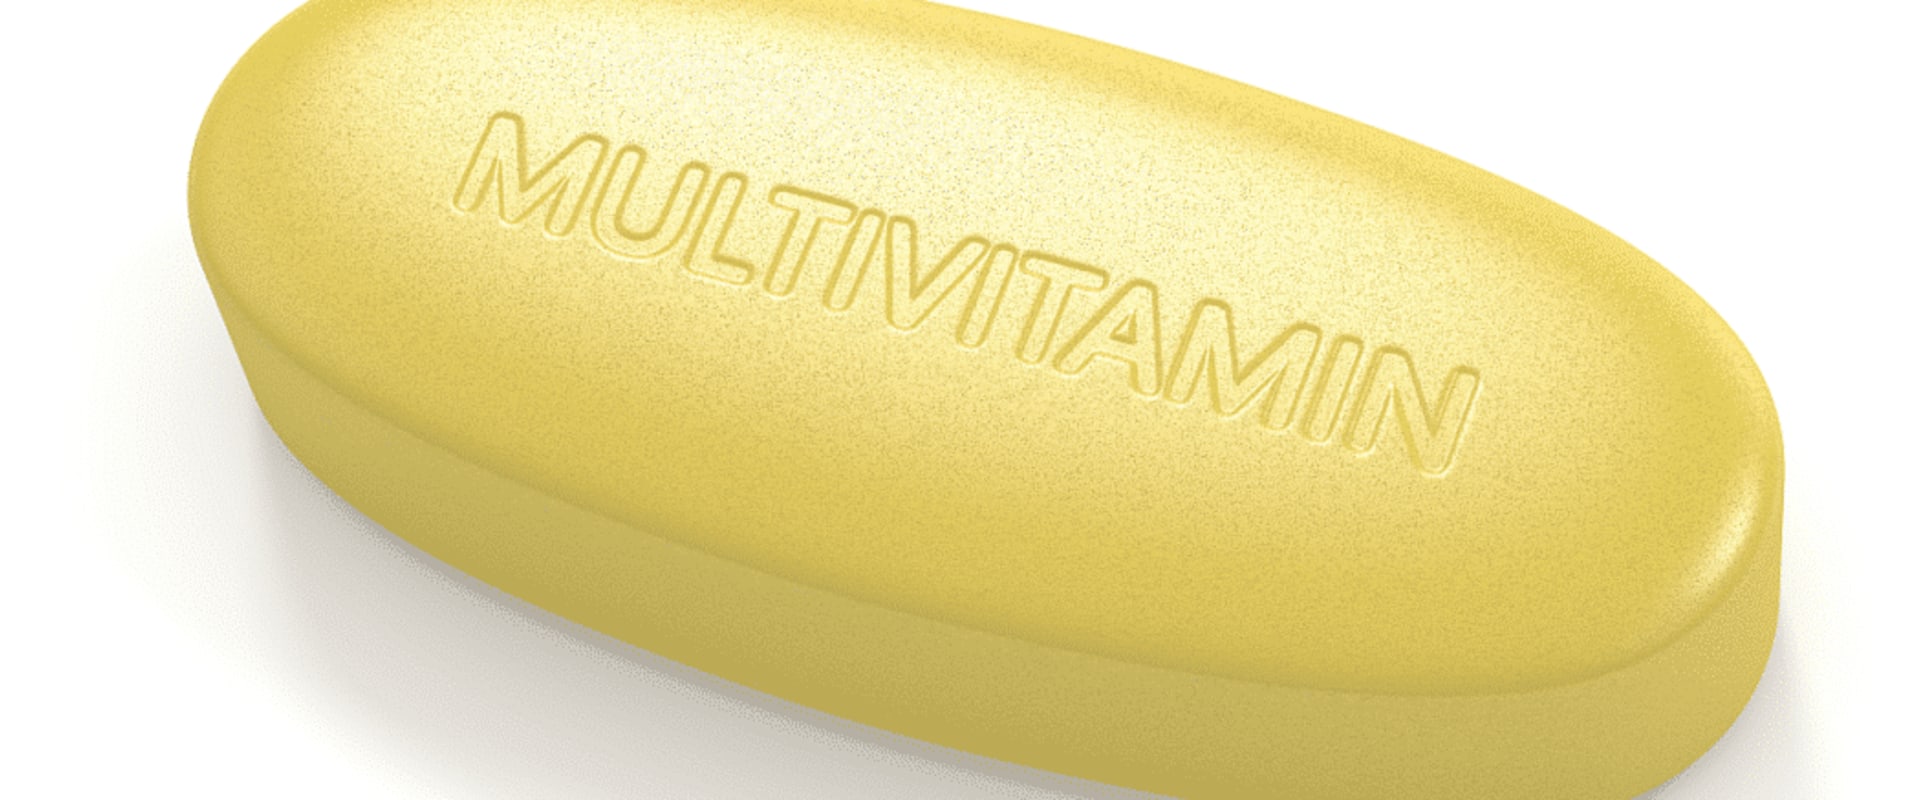 Can i take collagen supplements with multivitamins?